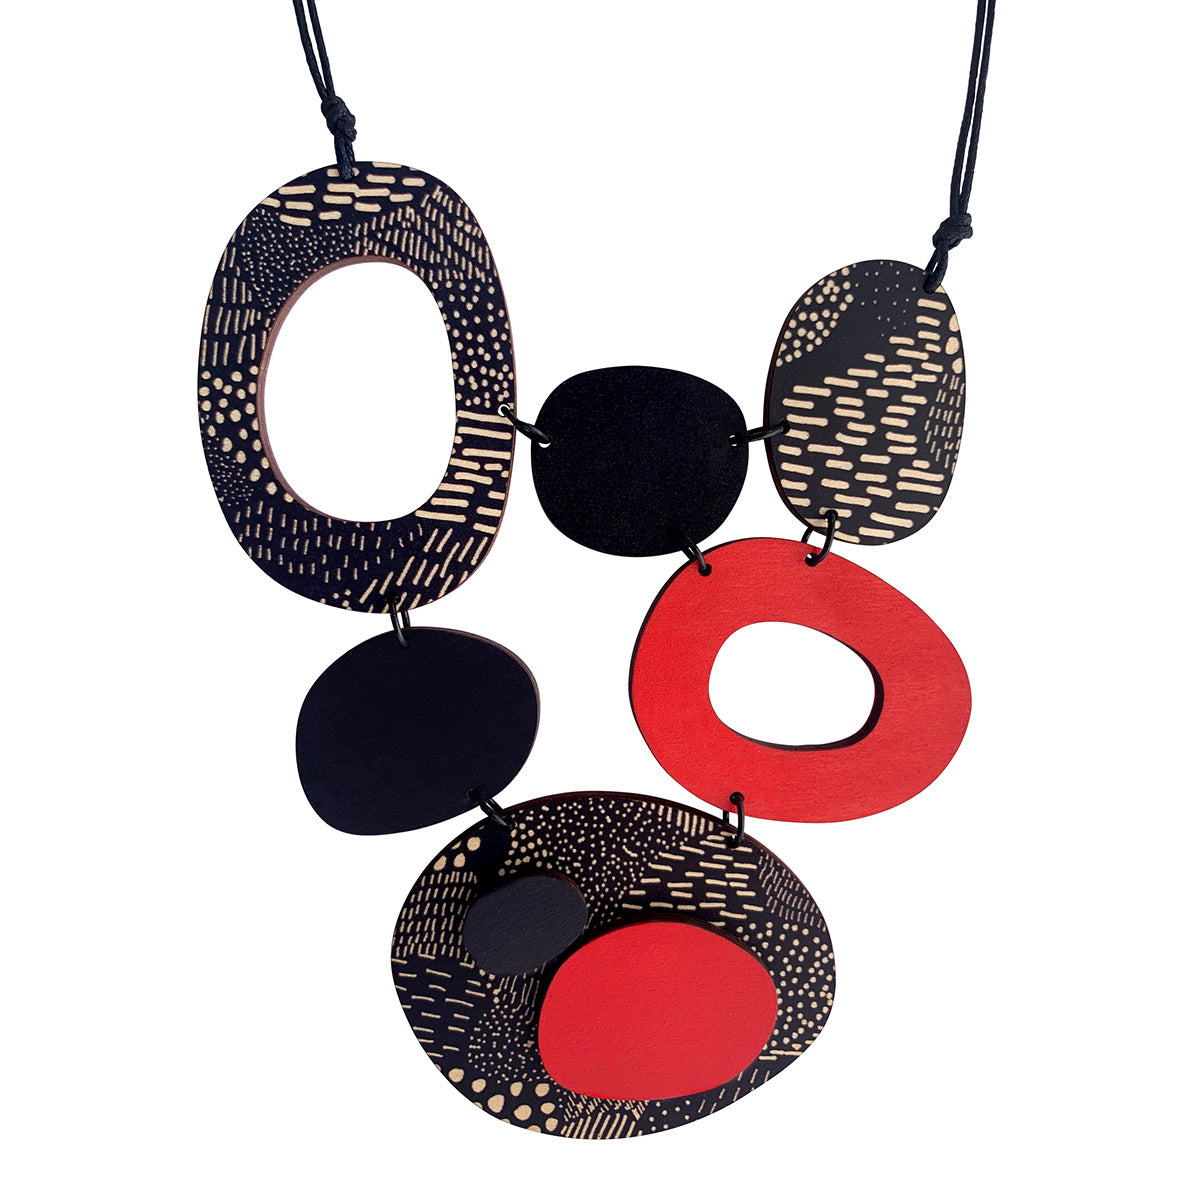 8 piece necklace in red and Night Garden pattern